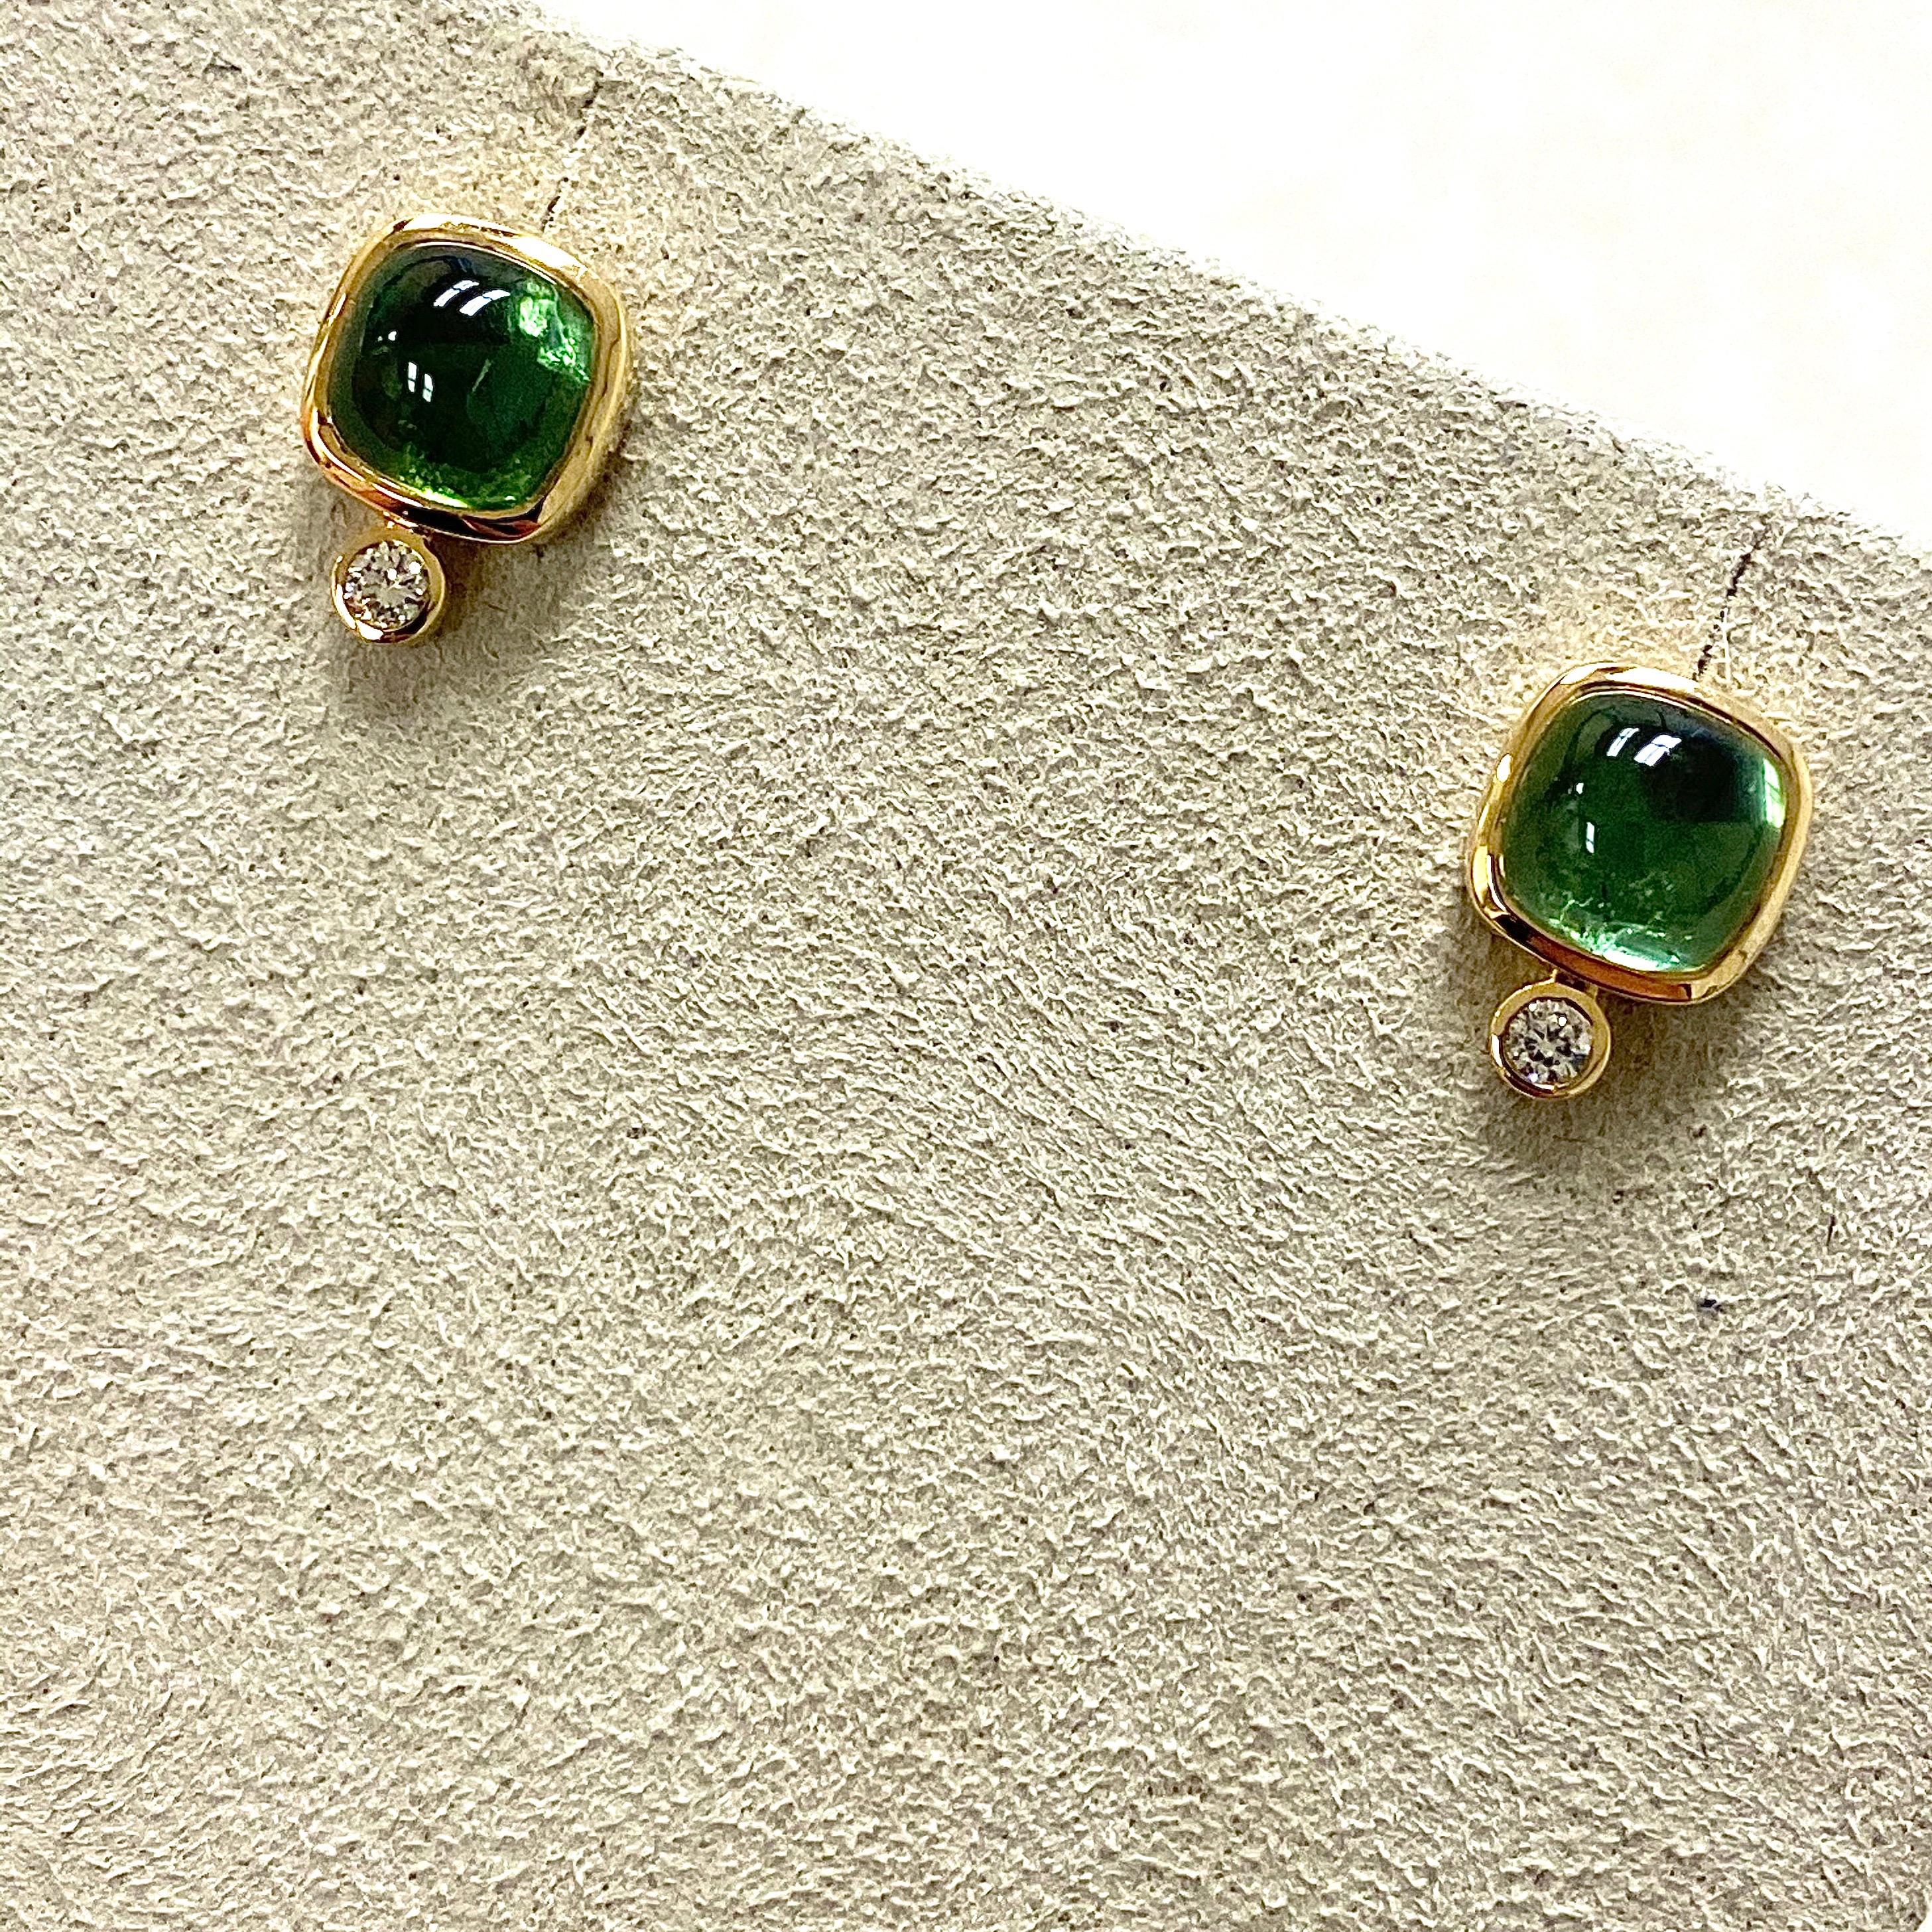 Created in 18 karat yellow gold
Green tourmaline sugarloaf cabochons 4 cts approx
Diamonds 0.10 ct approx
Limited edition

Unveil your glamorous side in this exclusive, limited edition pair of Candy Blue Topaz & Diamond earrings, lovingly crafted